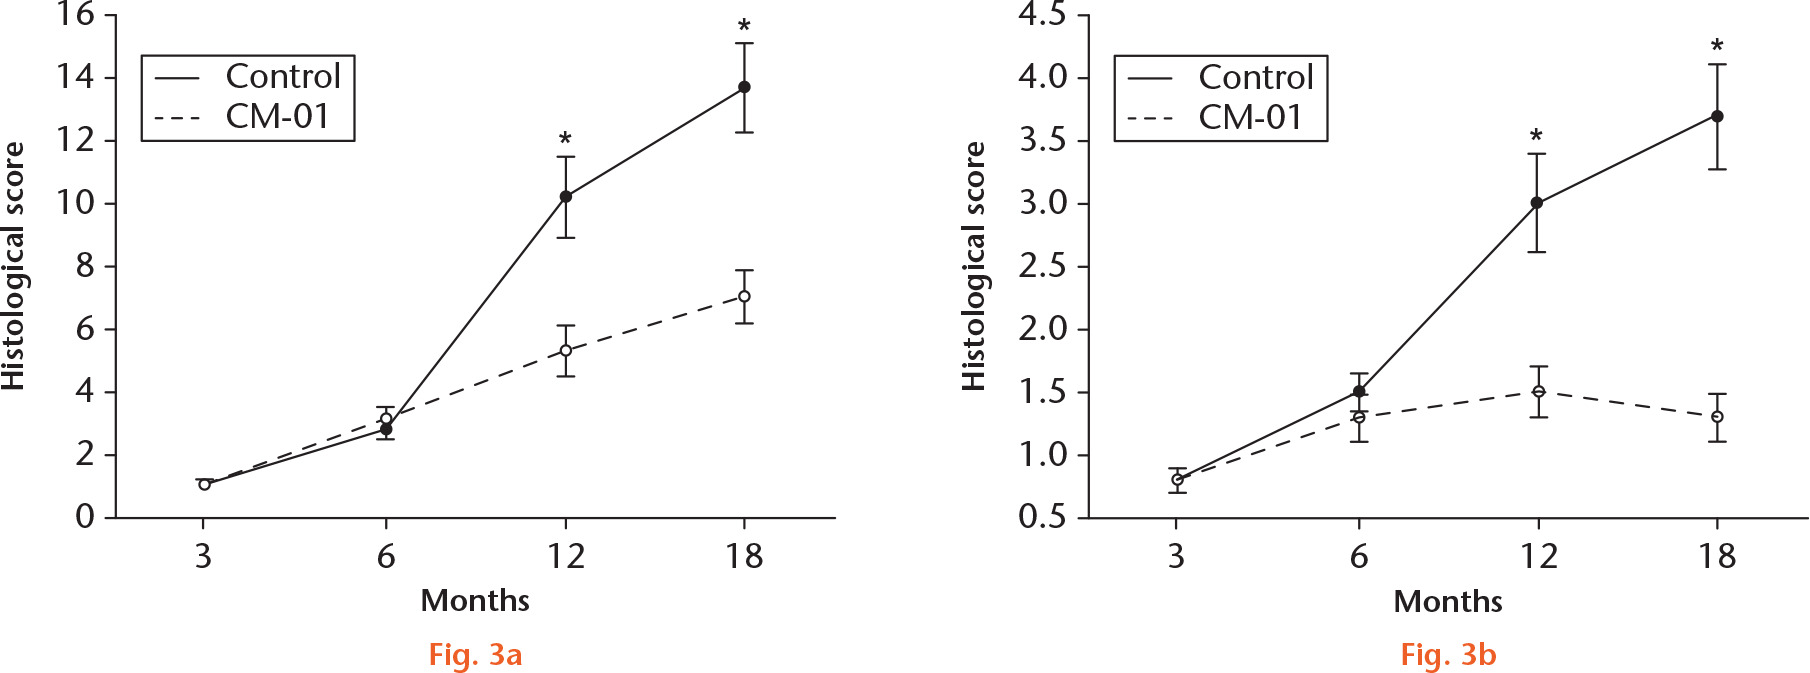  
            Graphs showing a) histological scores of cartilage and b) subchondral bone advance. Histological scores of articular cartilage in 18-month-old untreated guinea pigs and age-matched Carolinas Molecule-01 (CM-01)-treated guinea pigs were 13.68 (sd 1.44) and 7.02 (sd 0.04), respectively. Histological score of subchondral bone advance in 18-month-old untreated and age-matched CM-01 treated guinea pigs were 3.73 (sd 0.42) and 1.32 (sd 0.19), respectively. *p < 0.05, versus untreated control (Mann–Whitney U test).
          